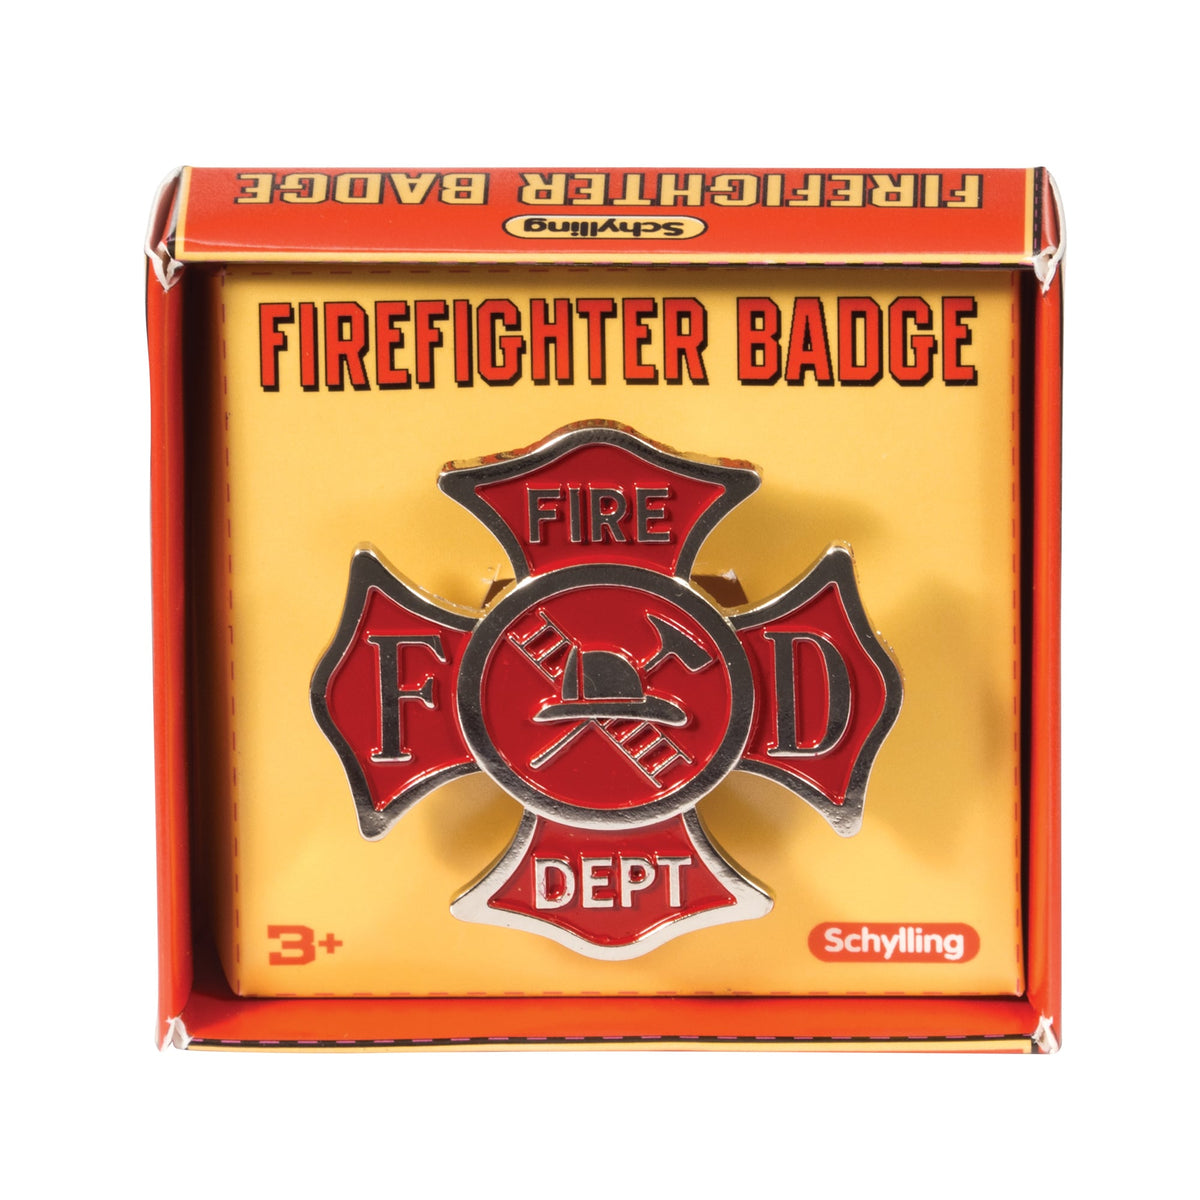 FIREFIGHTER BADGE – Simply Wonderful Toys